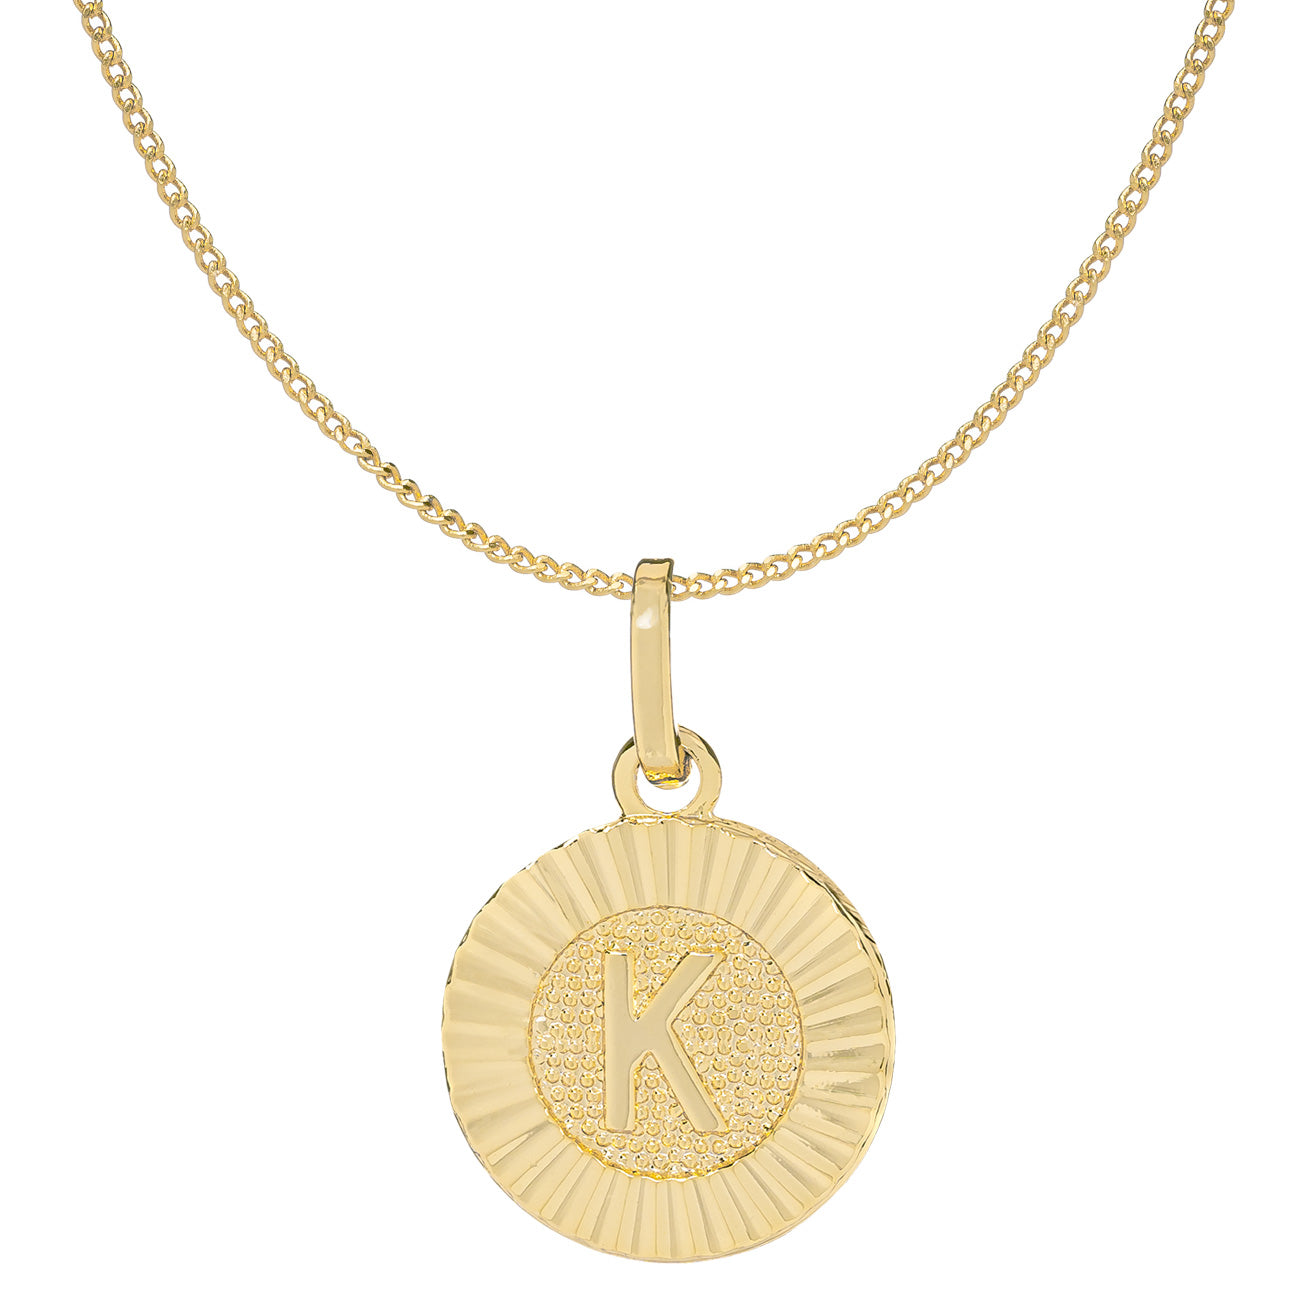 Initial Necklaces | Shop What's New | Kendra Scott